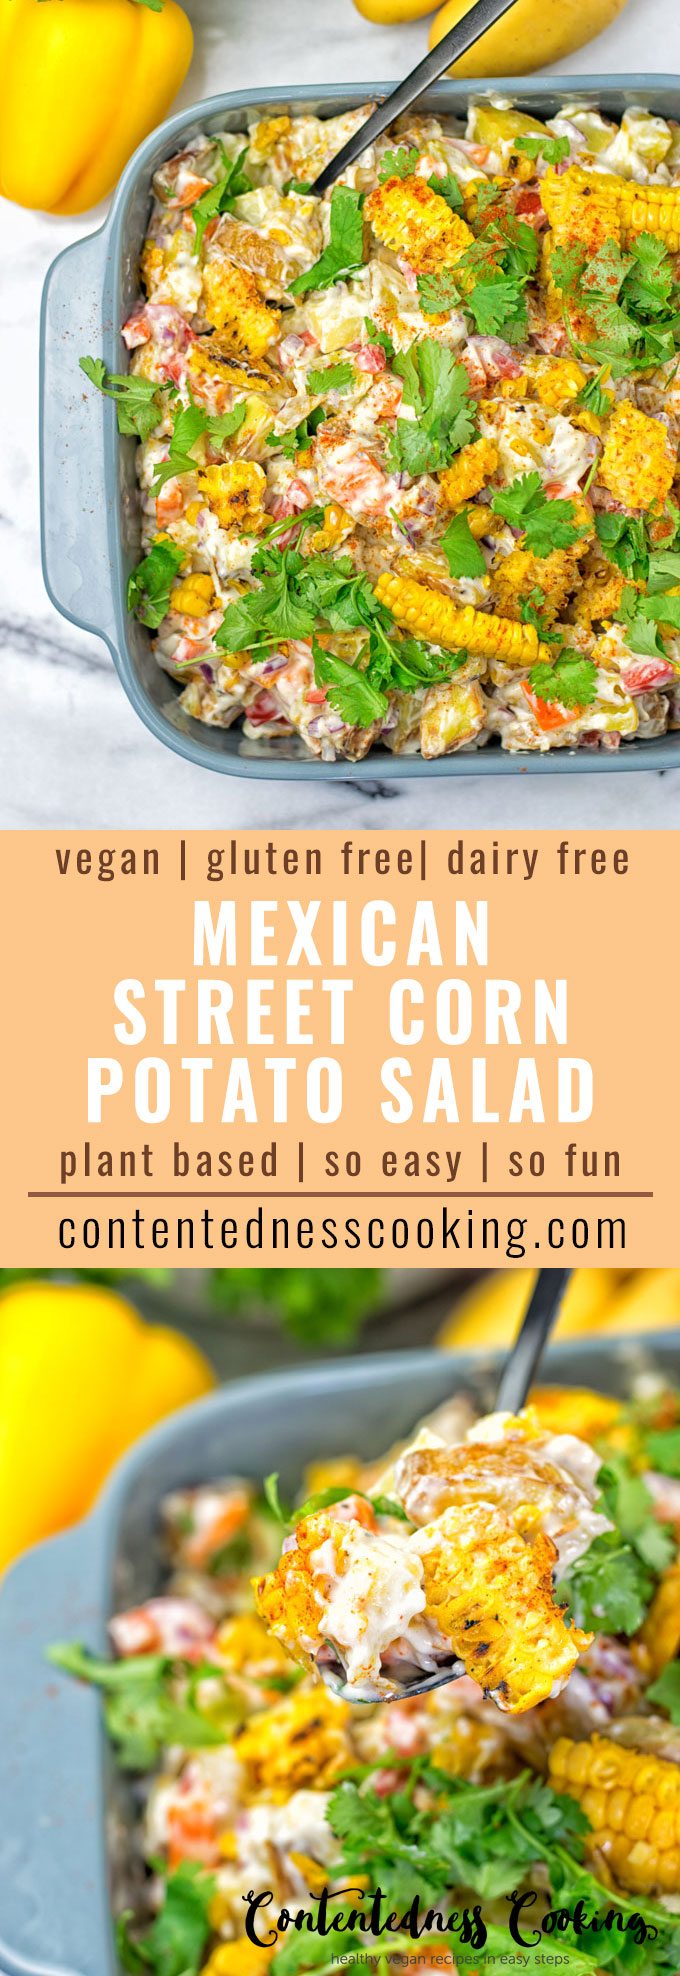 Two pictures of the Mexican Street Corn Salad with recipe title text.